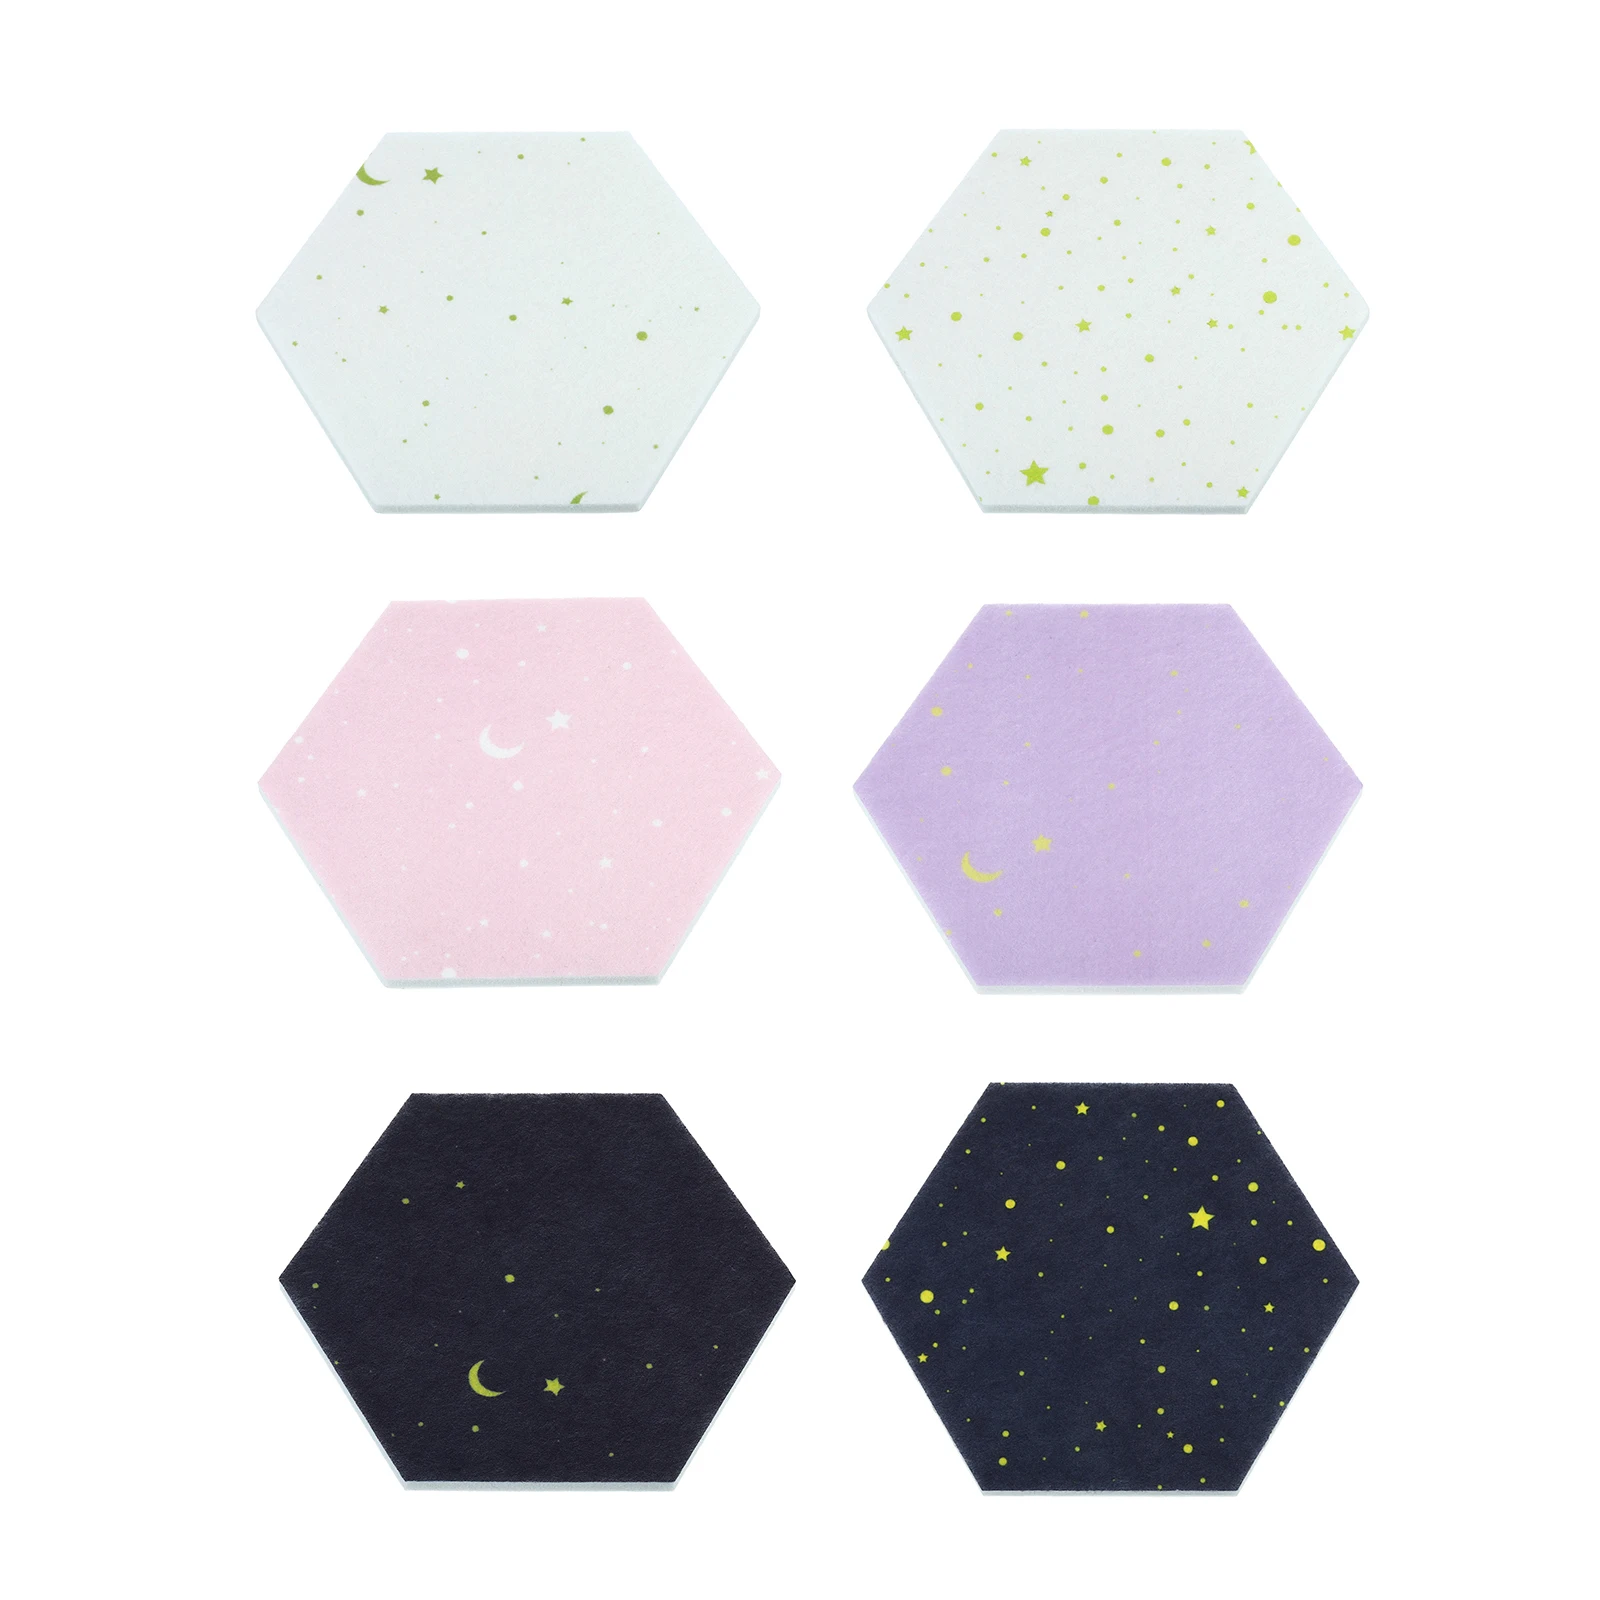 6 pcs bulletin board for classroom reminder message decor photo cork announcement hexagon memo notice 4Pcs Hexagon Felt Board Tile Bulletin Notice Cork Self Adhesive Pin Board Message Room Wall Decor Sticky Notes Photo Display